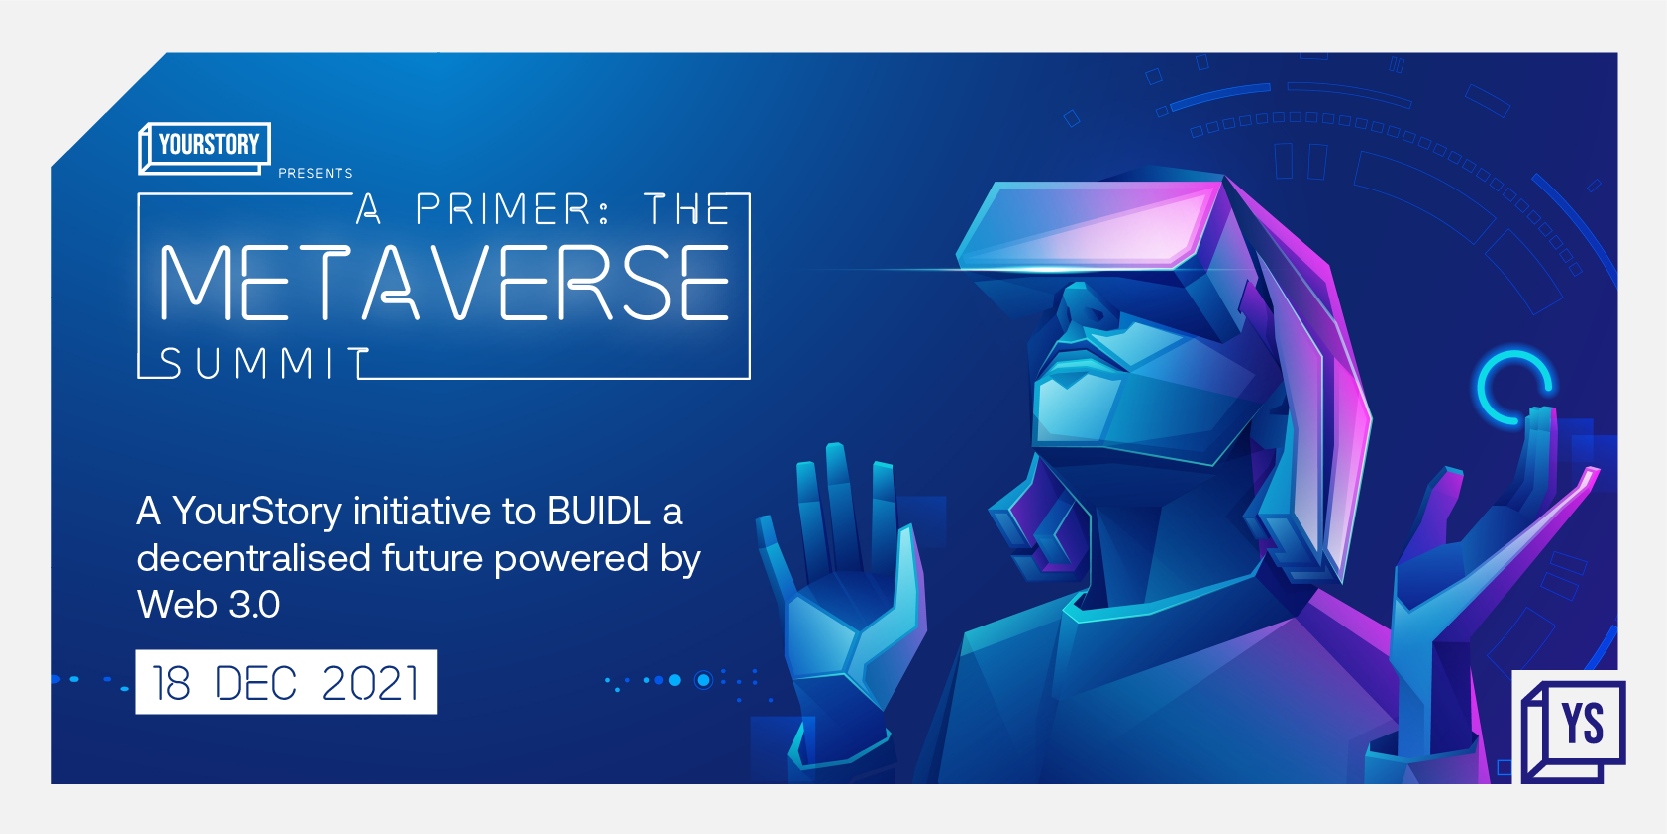 YourStory’s The Metaverse Summit - India’s first Web 3.0 conference to BUIDL a decentralised future - is around the corner